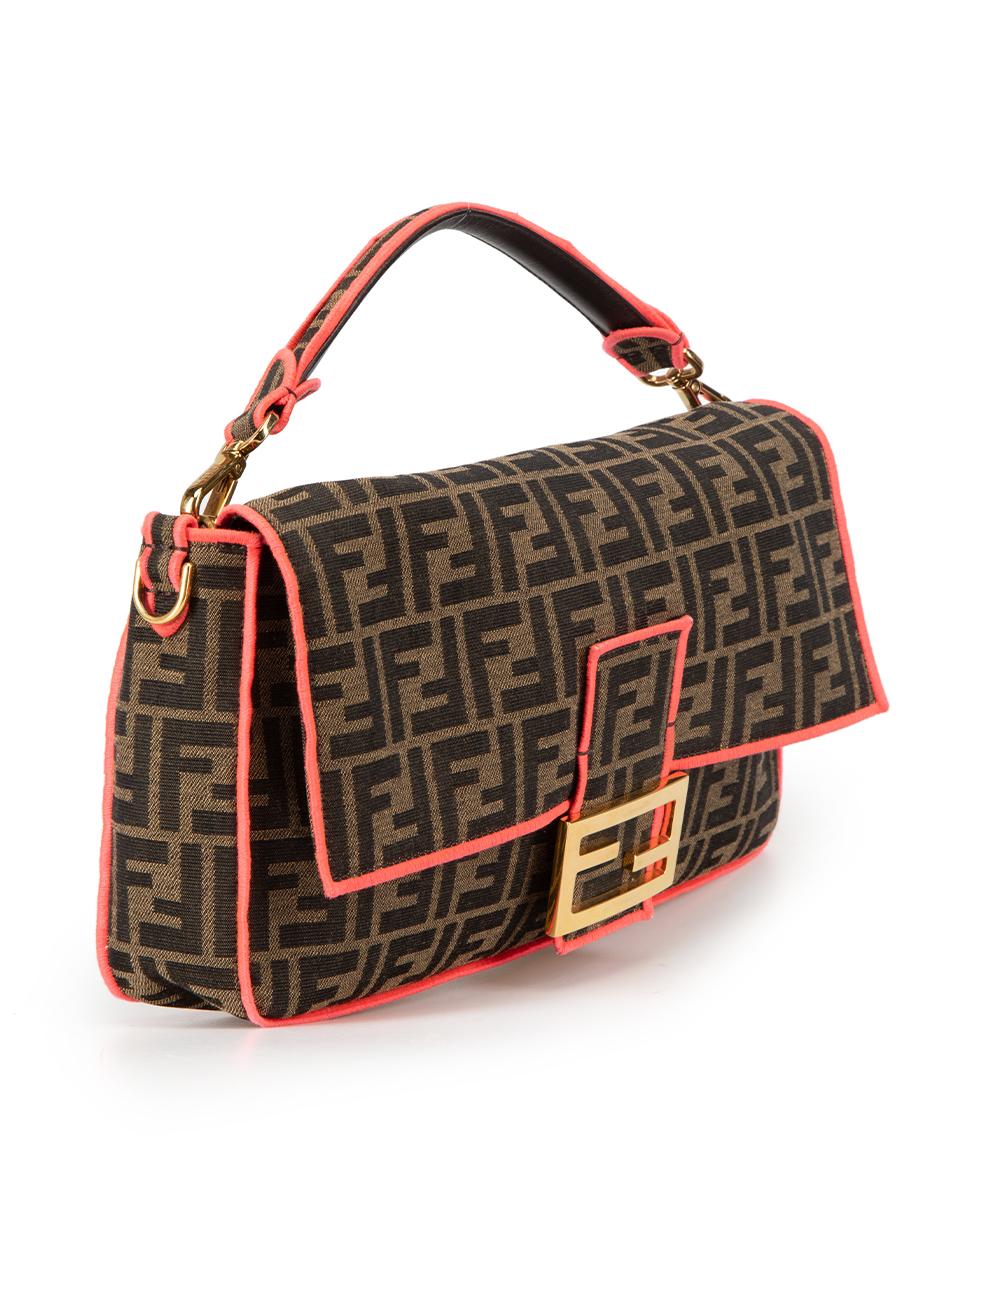 CONDITION is Very good. Minimal wear to bag is evident. Minimal wear to the neon stitching with slight discolouration due to age, the hardware of the bag also shows signs of tarnishing with faint scratches on this used Fendi designer resale